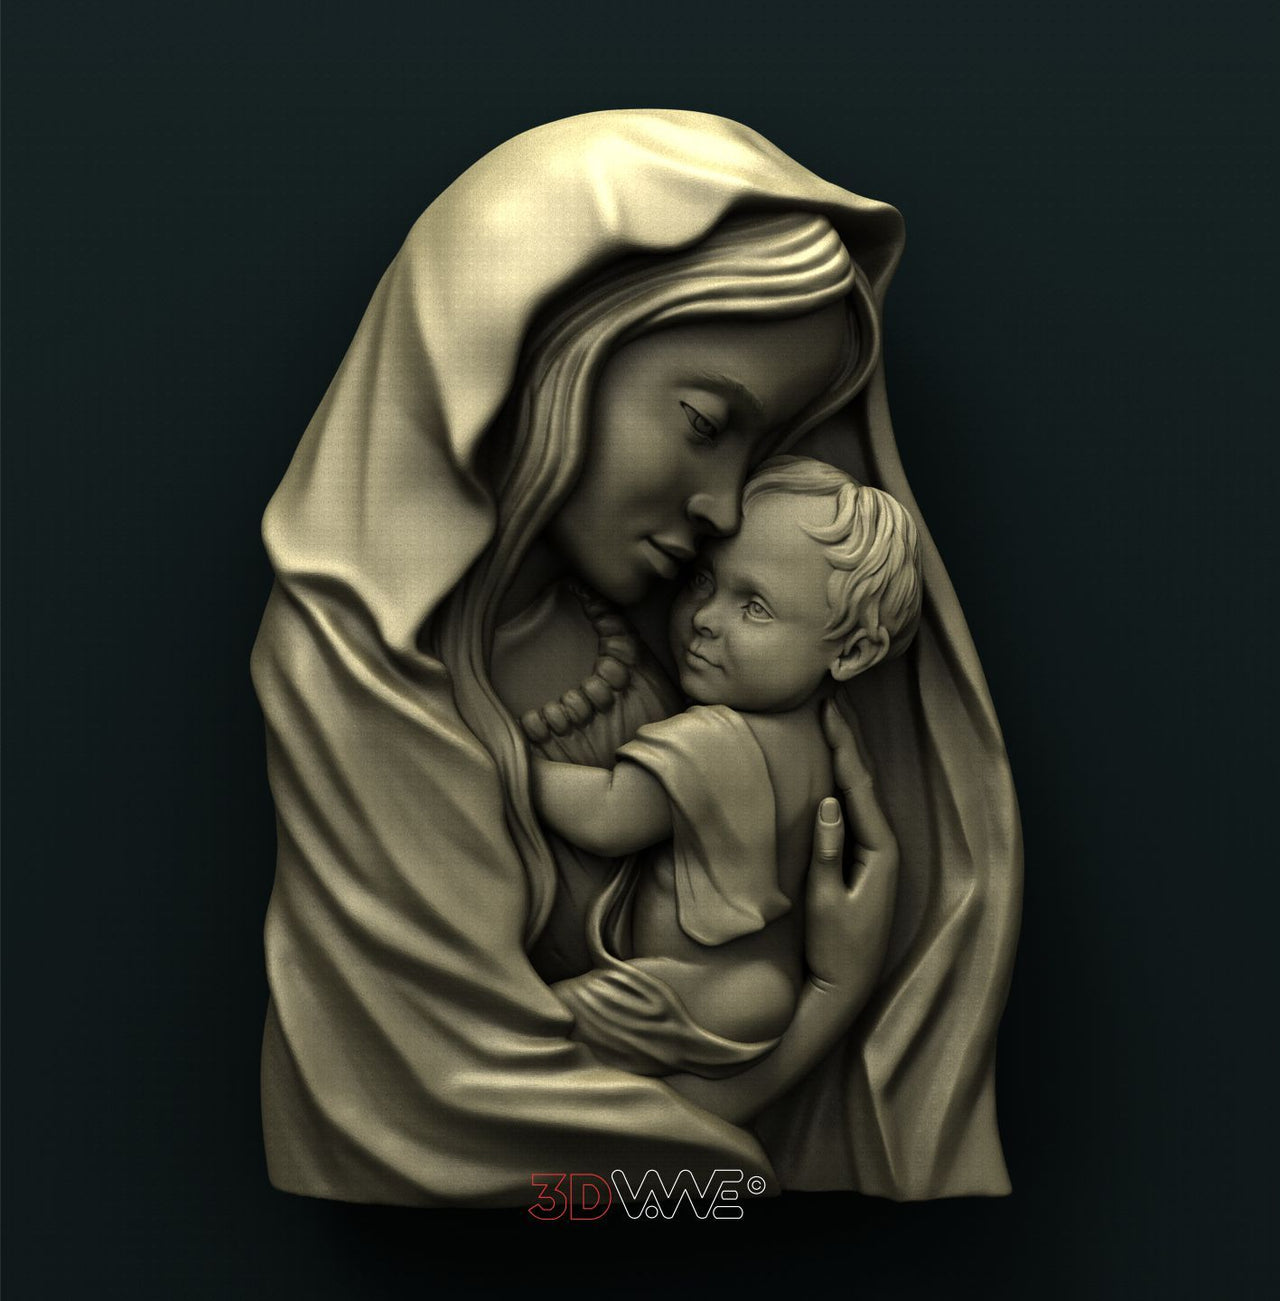 MOTHER AND A CHILD 3D STL 3DWave